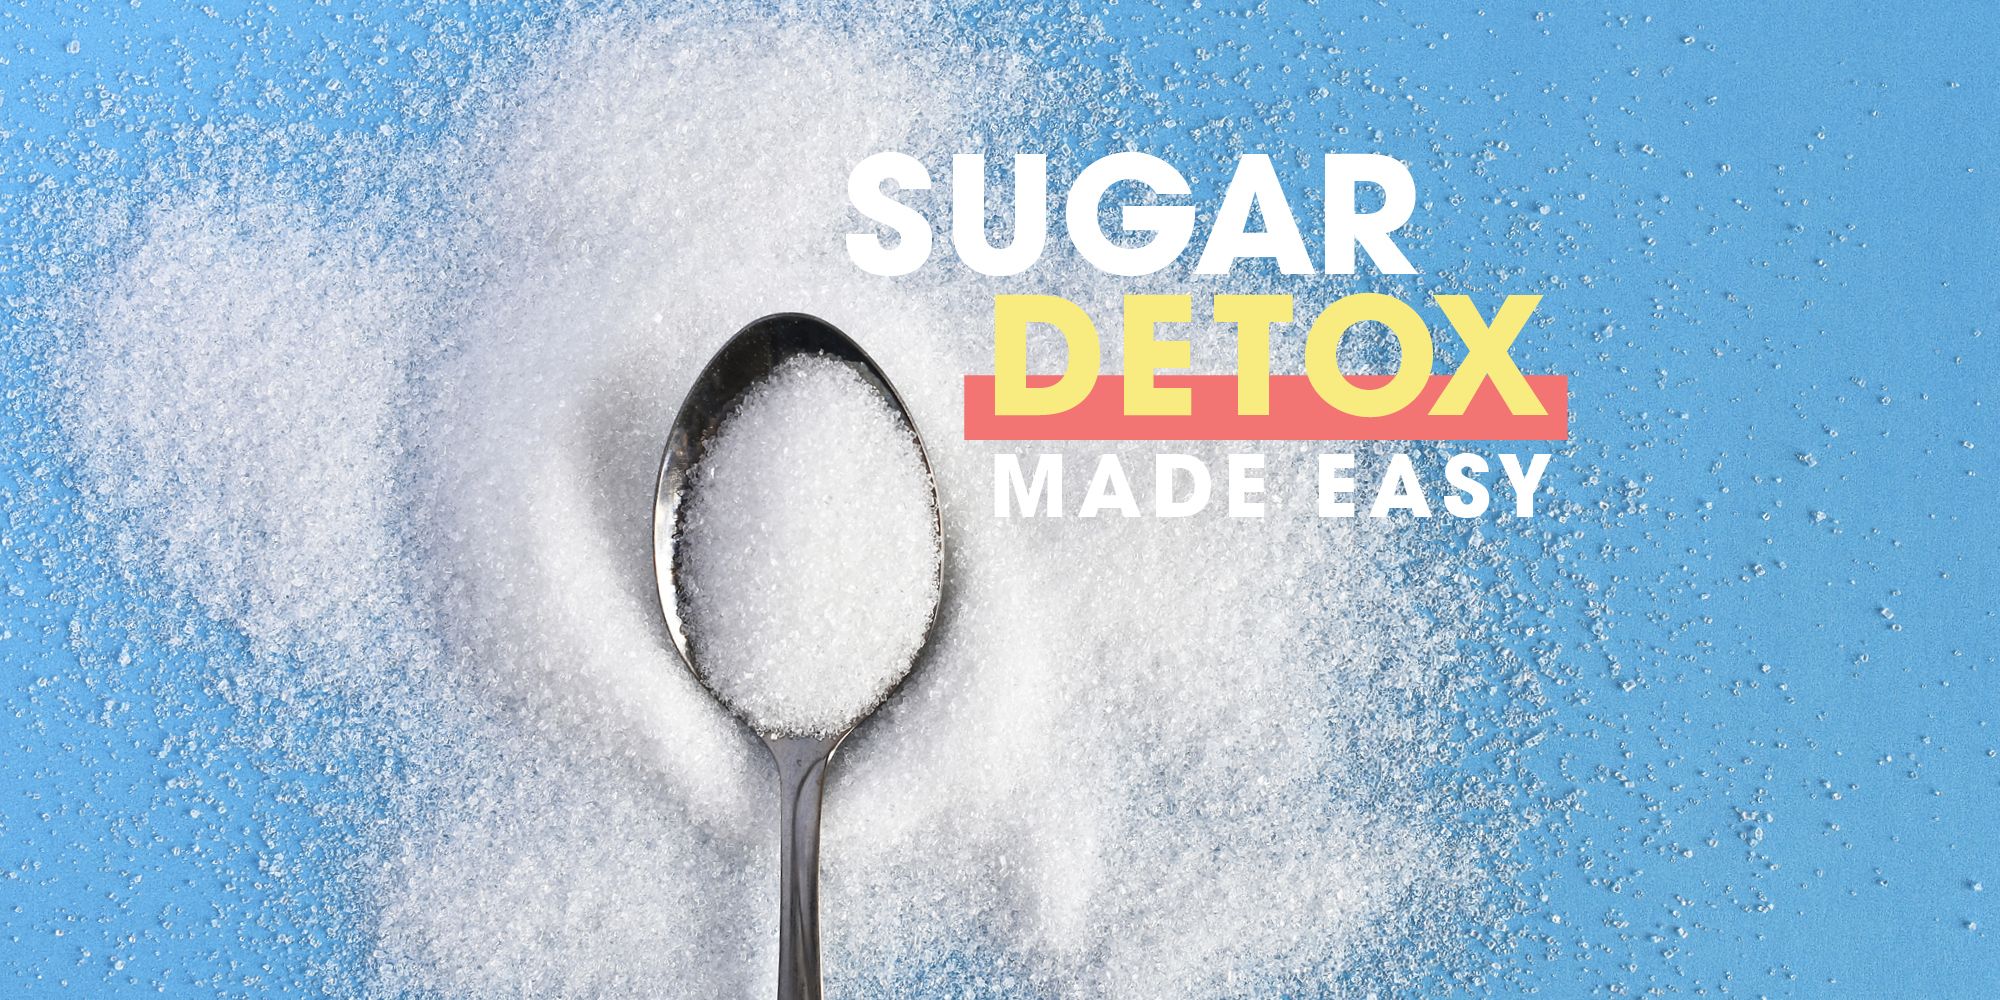 Best Sugar Detox Guide — How to Safely Detox From Sugar